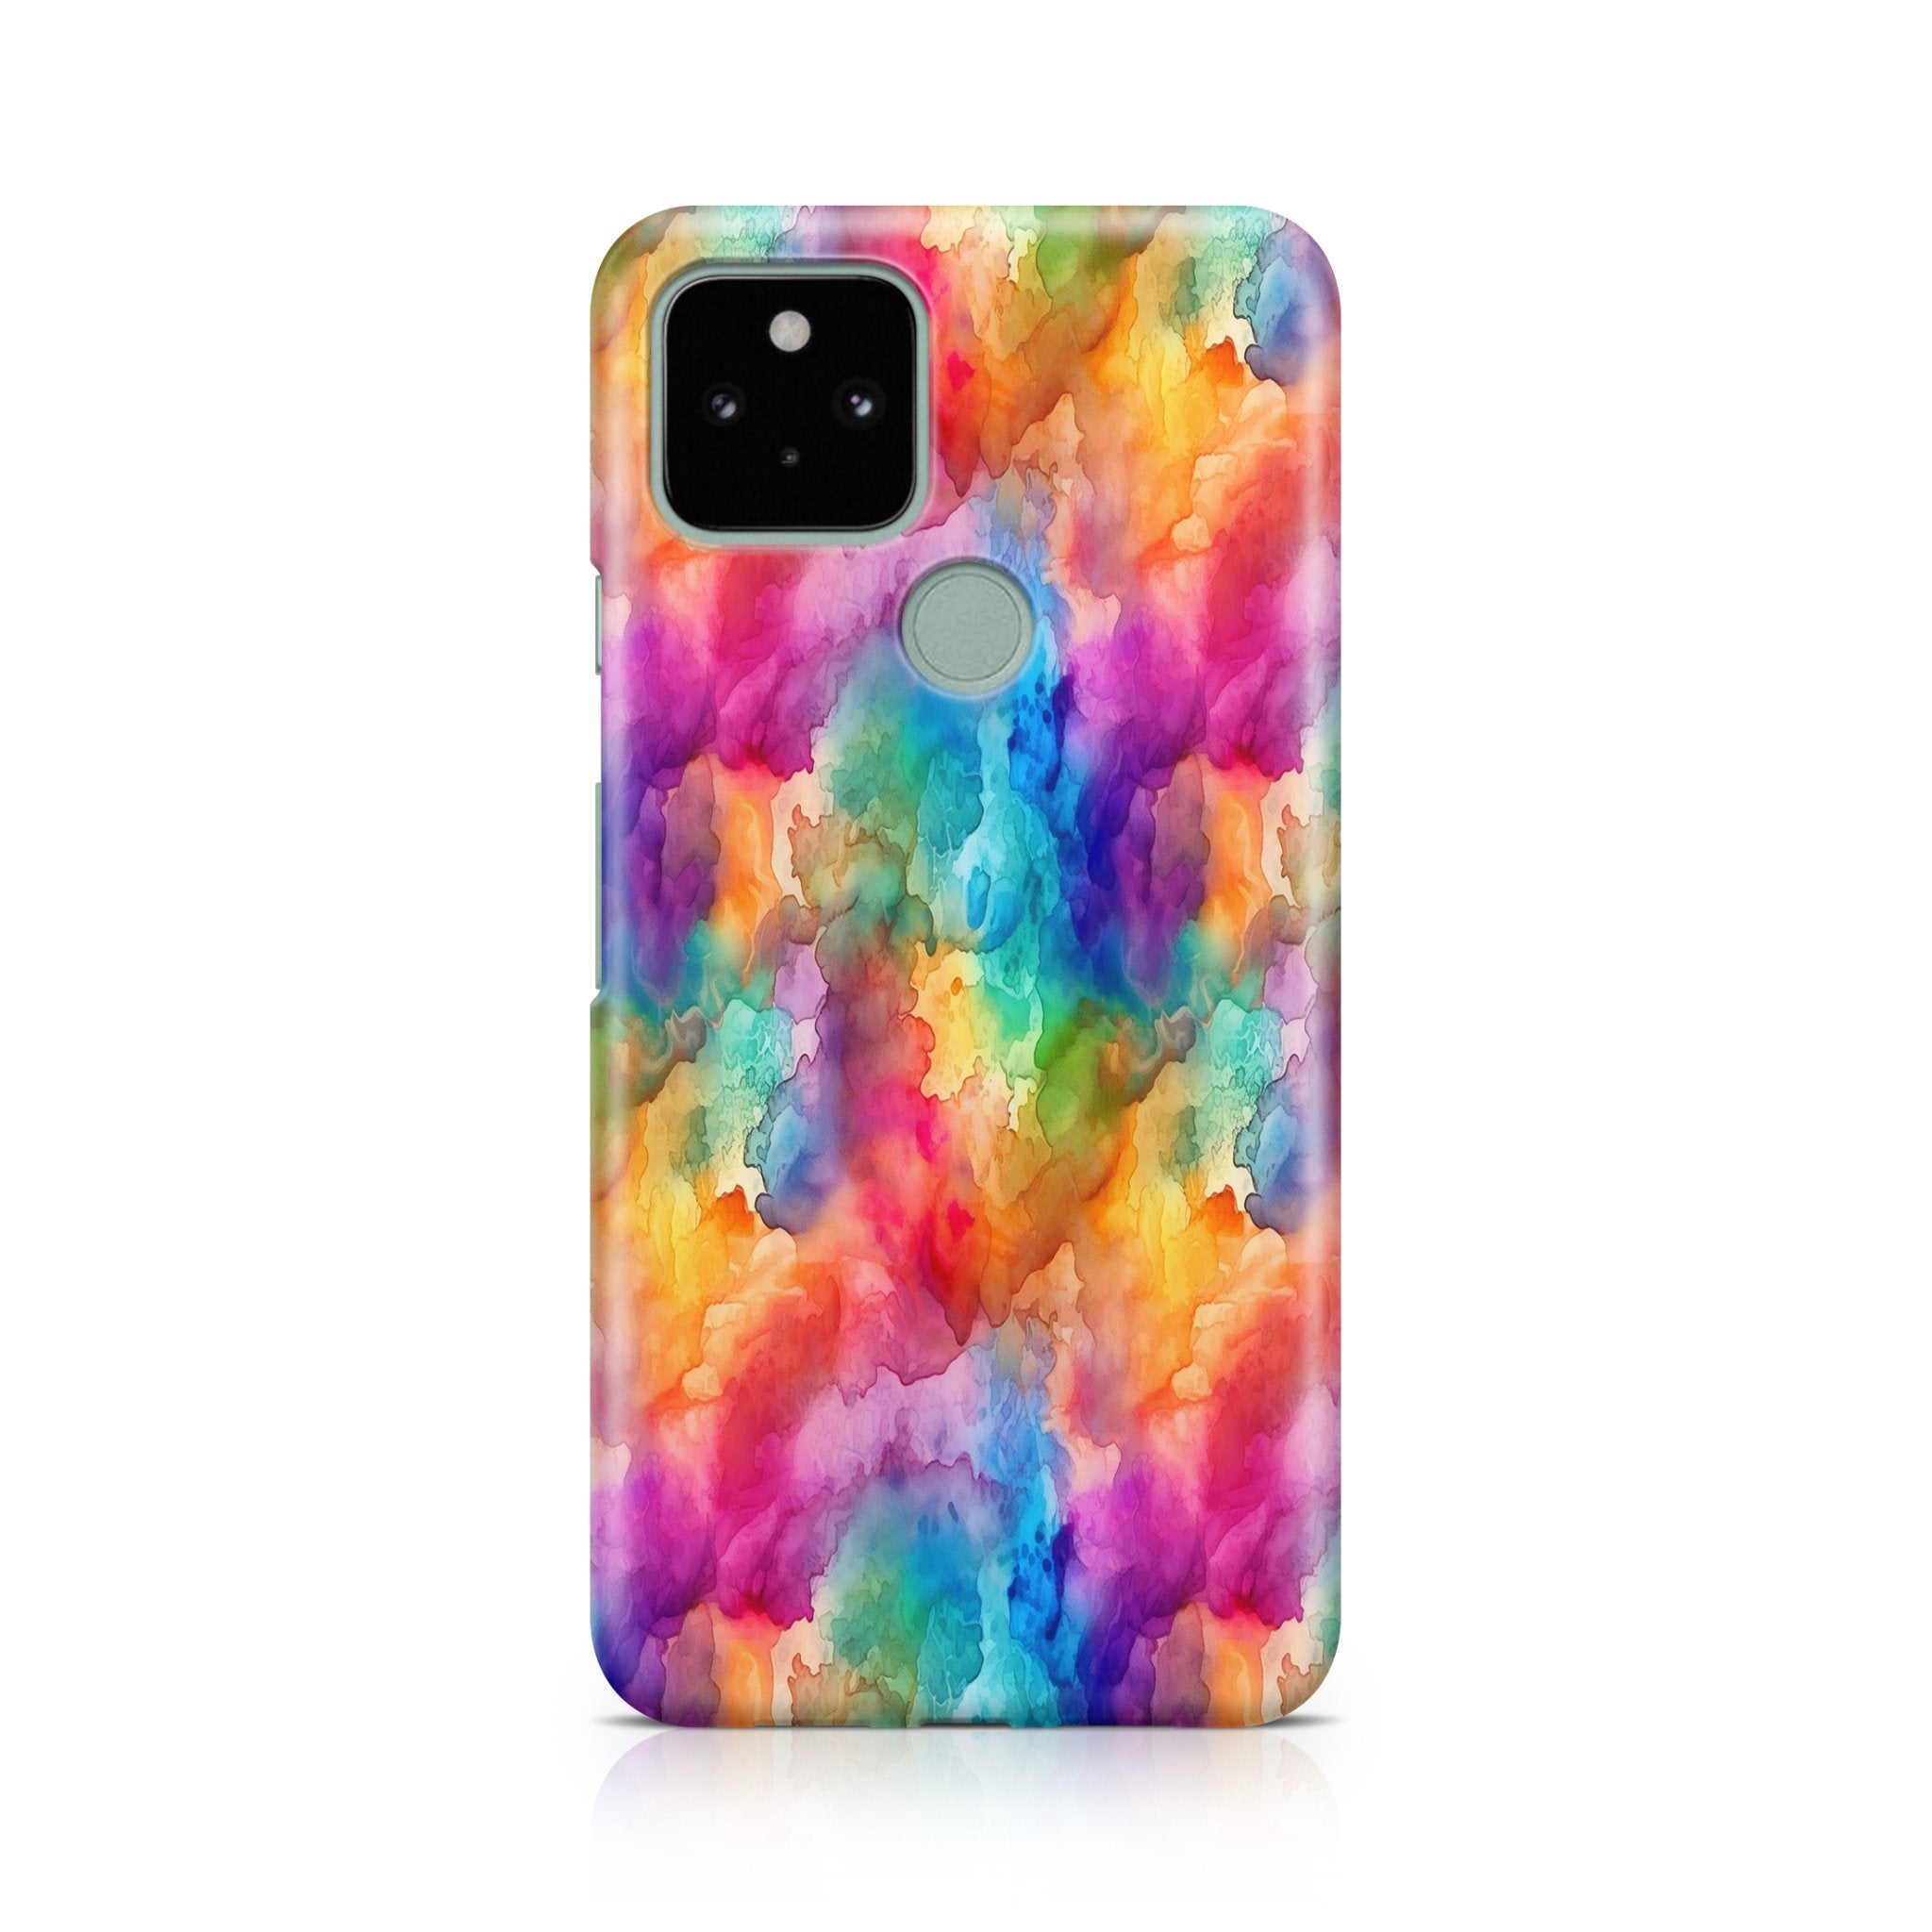 Colorful Mind - Google phone case designs by CaseSwagger